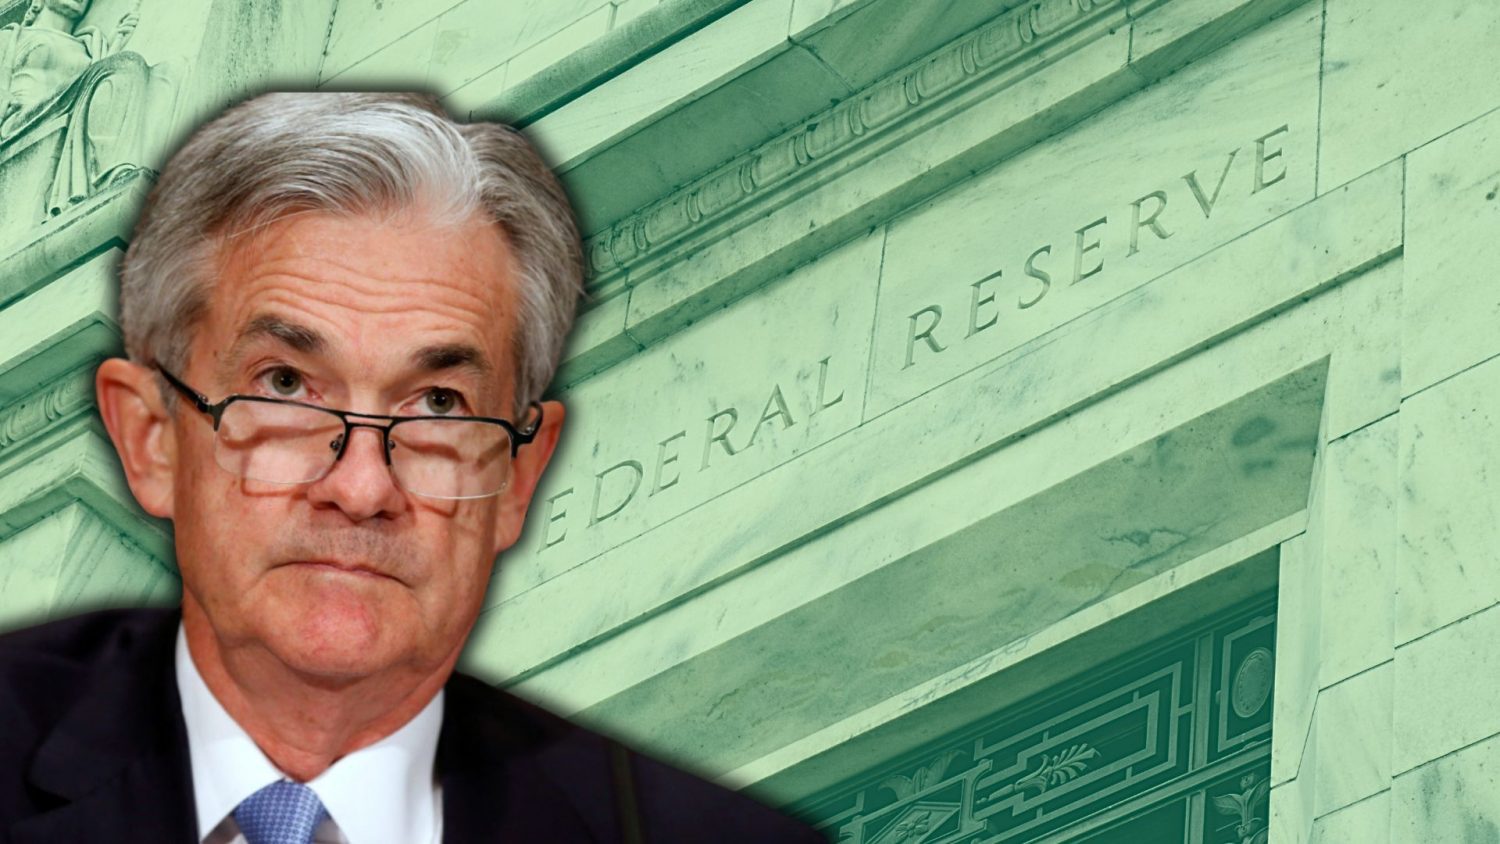 Dealers and consumers will have to wait for relief from higher interest rates as Federal Reserve leaders leave its benchmark rate unchanged